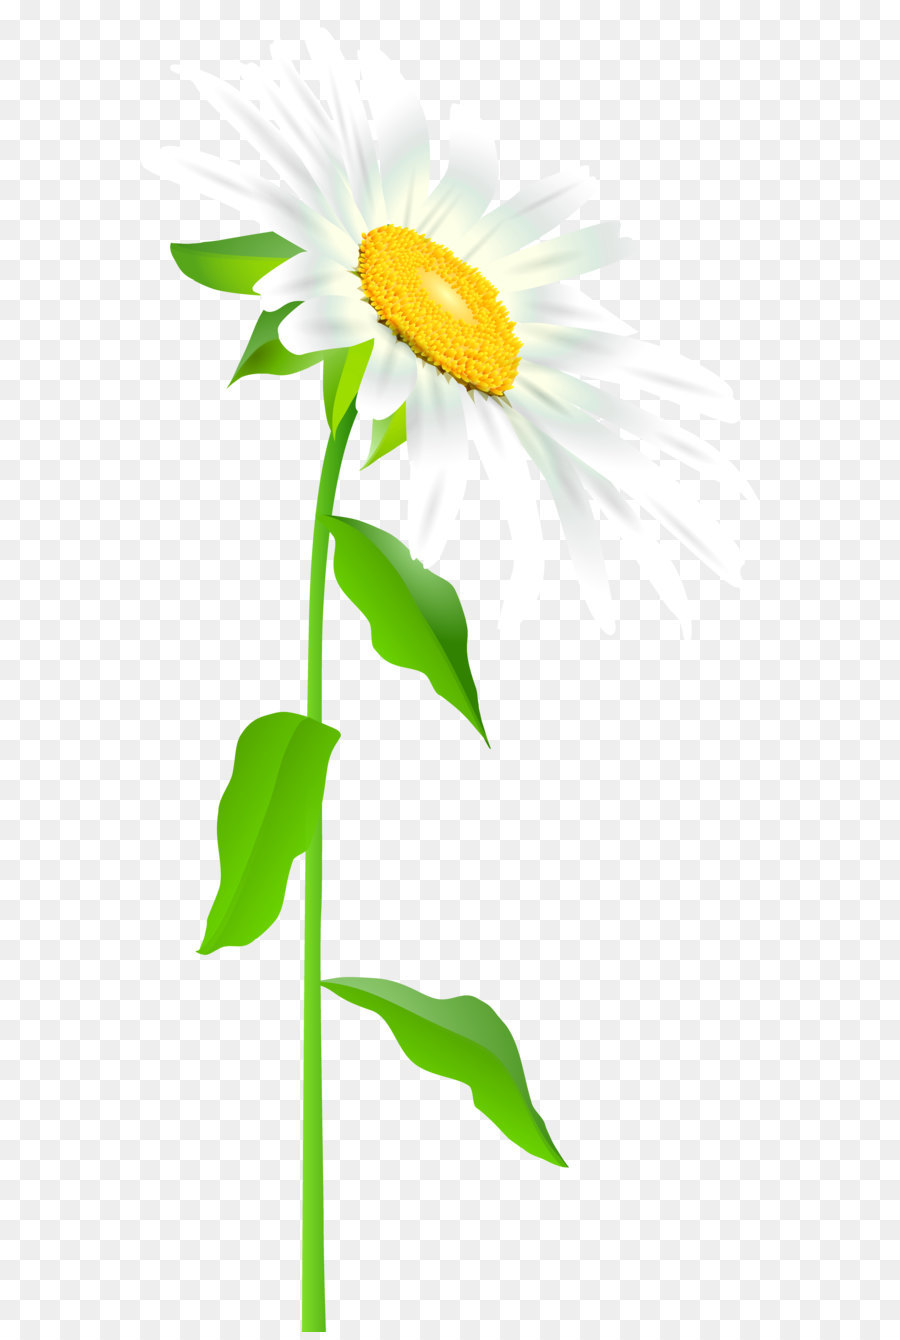 Common sunflower Text Leaf Illustration - Daisy with Stem Transparent PNG Clip Art Image png download - 3416*7000 - Free Transparent Easter Bunny png Download.